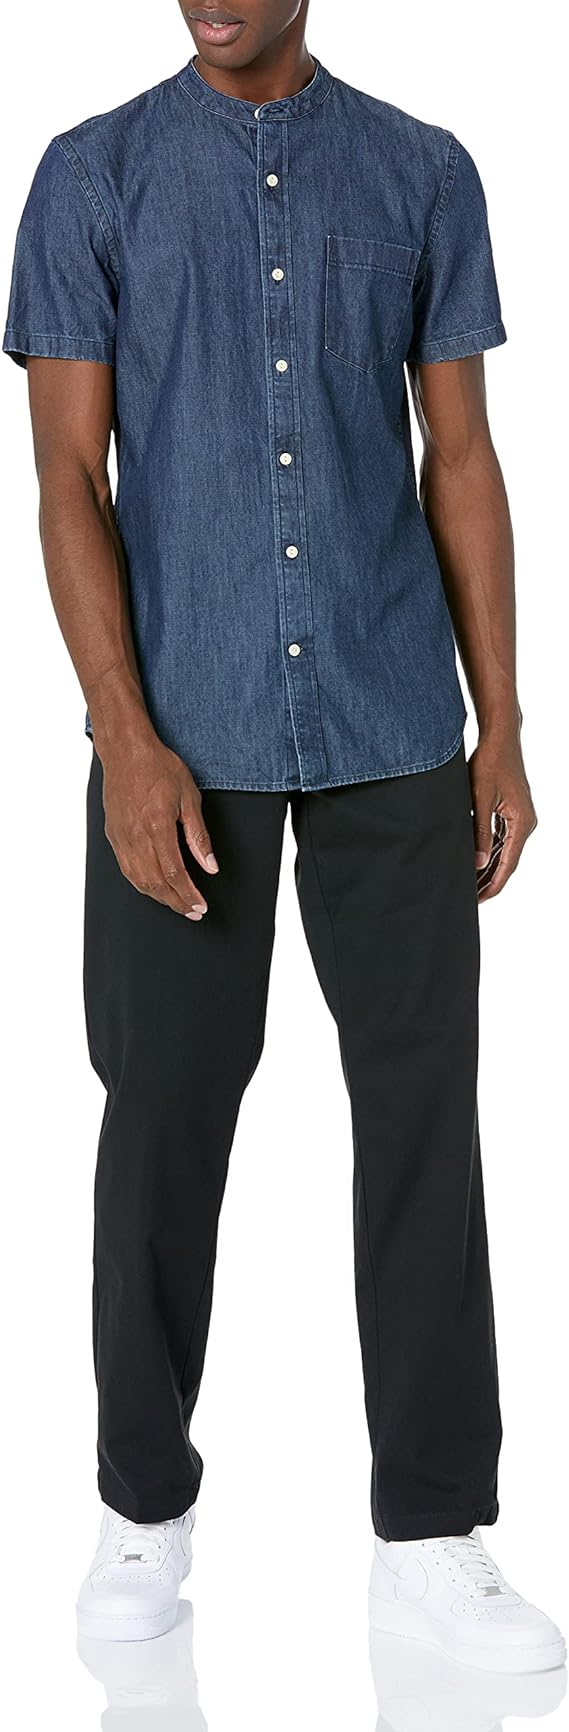 Men's Classic-Fit Wrinkle-Resistant Flat-Front Chino Pant tall up to 38L